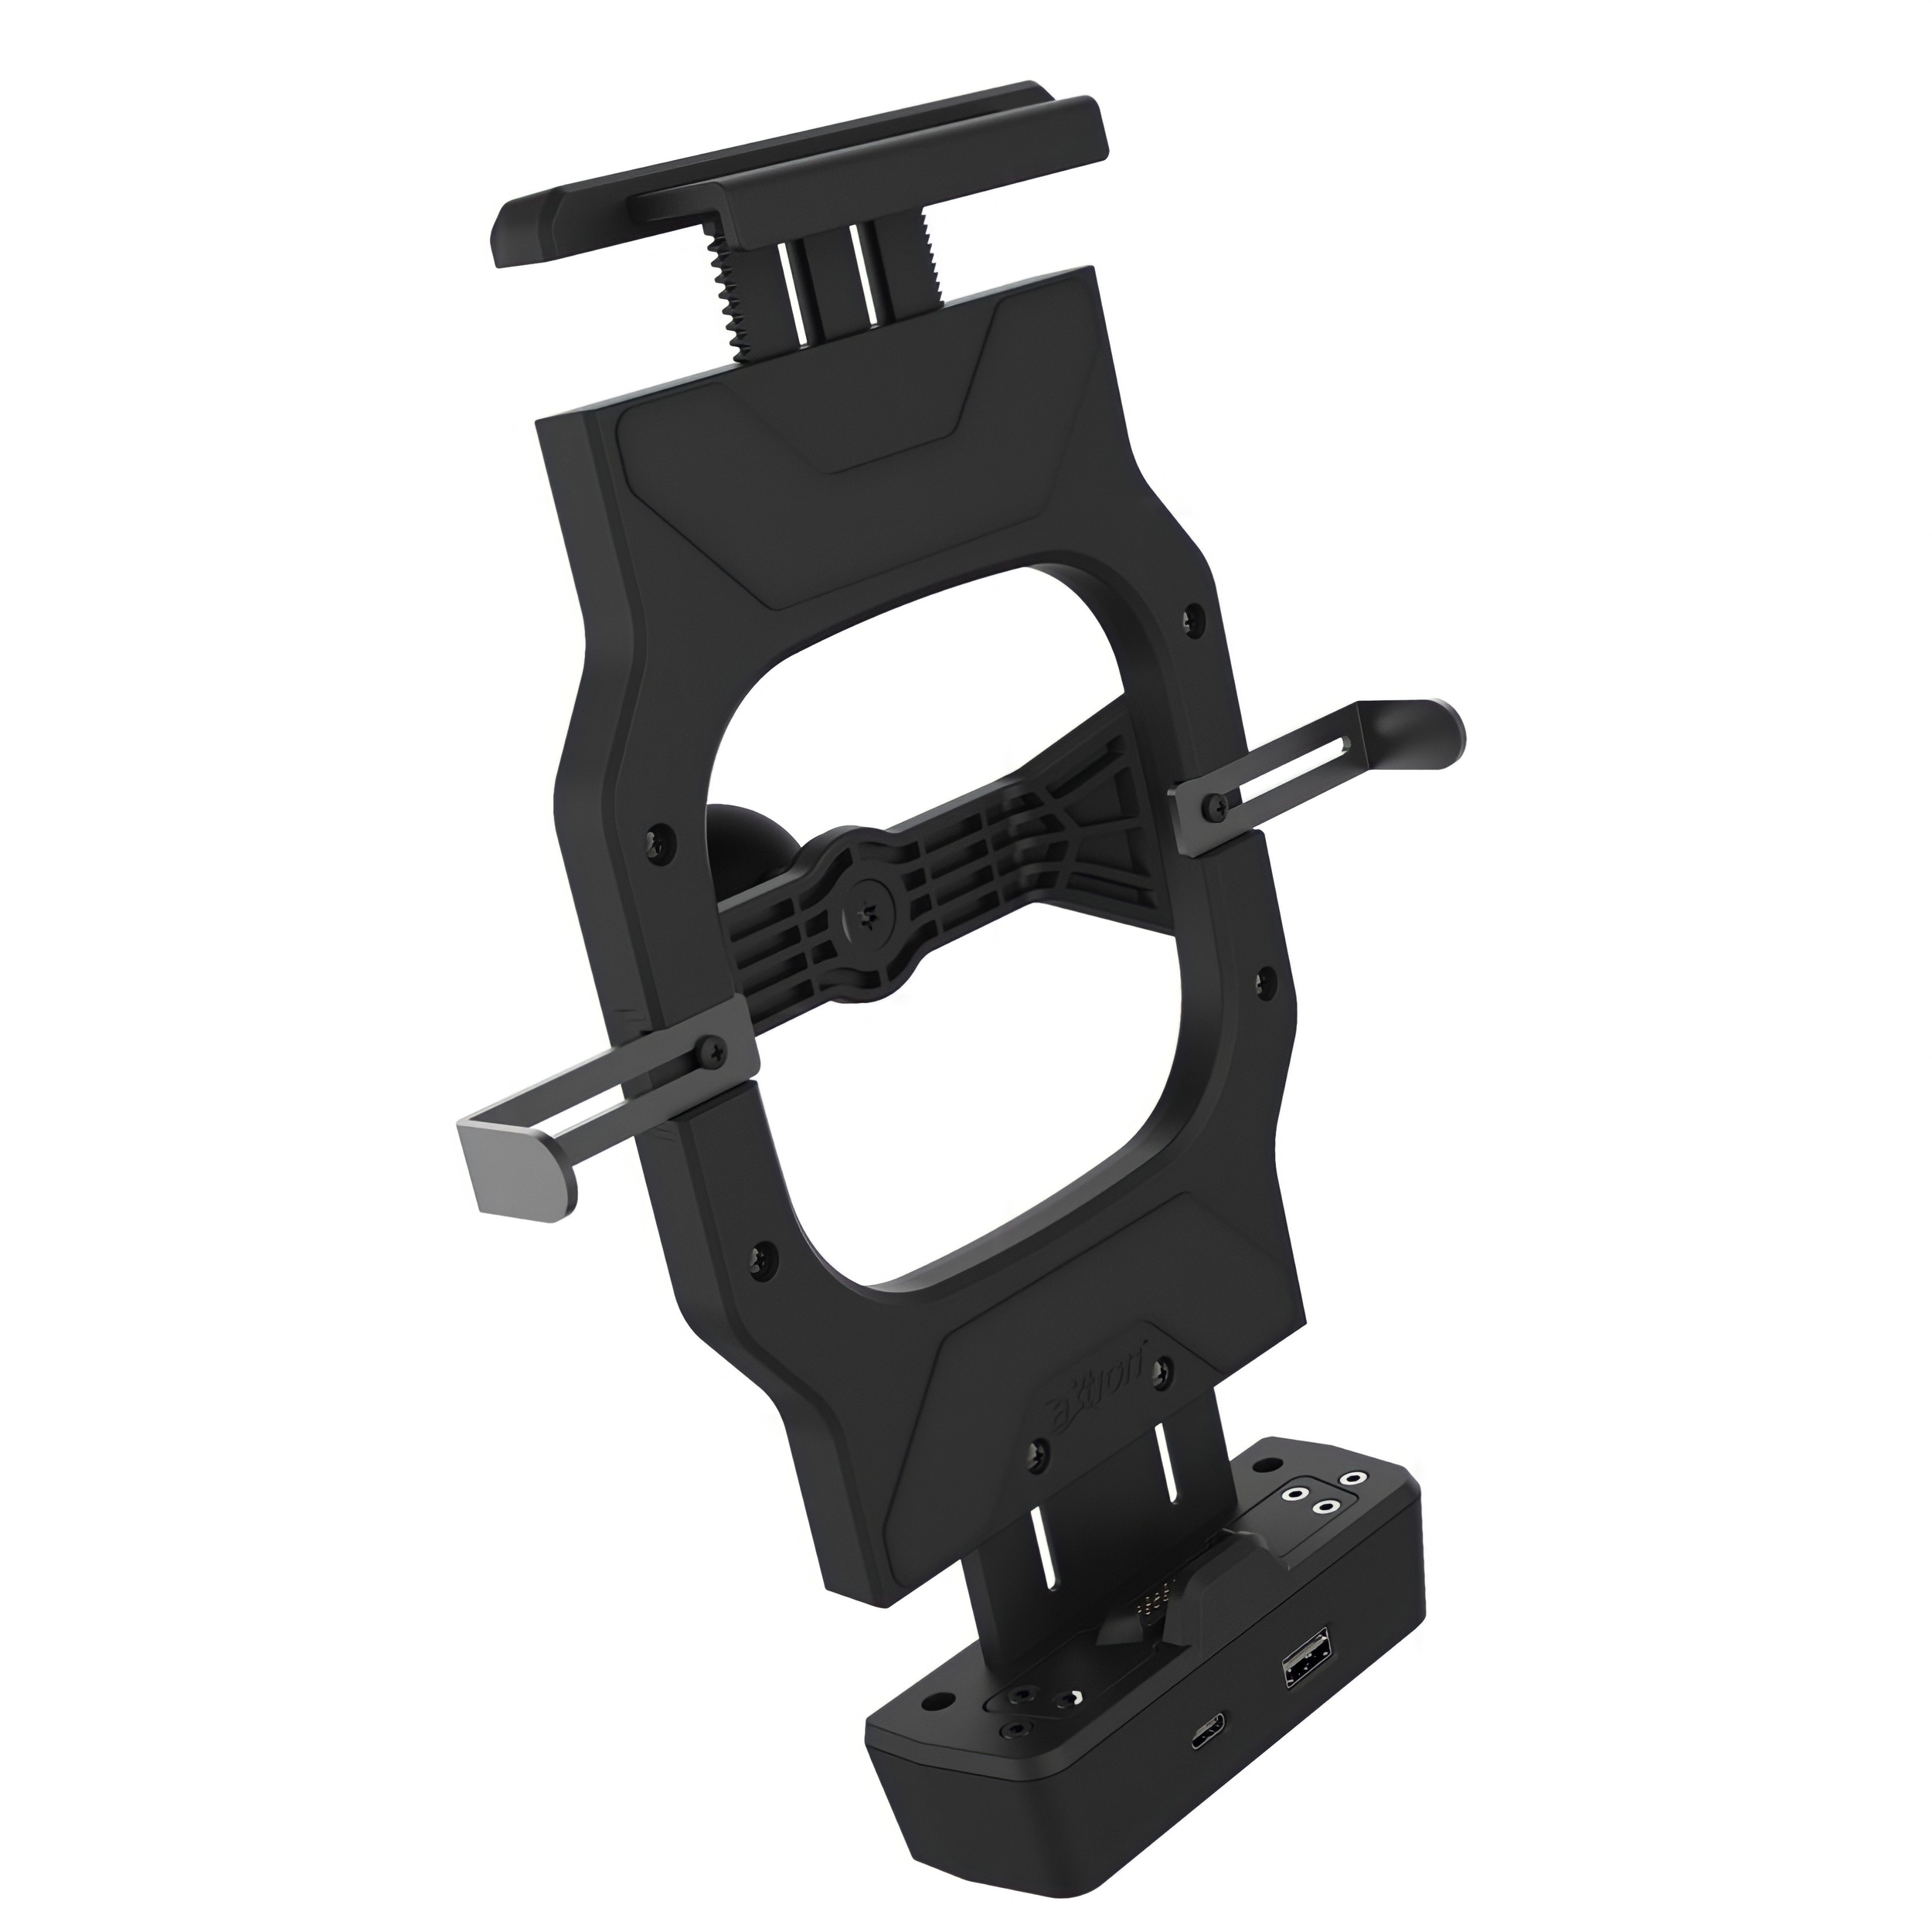 REF 2858 Support iPAD Mini 6 8.3p Charge et Synchronisation Axtion Volt Sync Stand